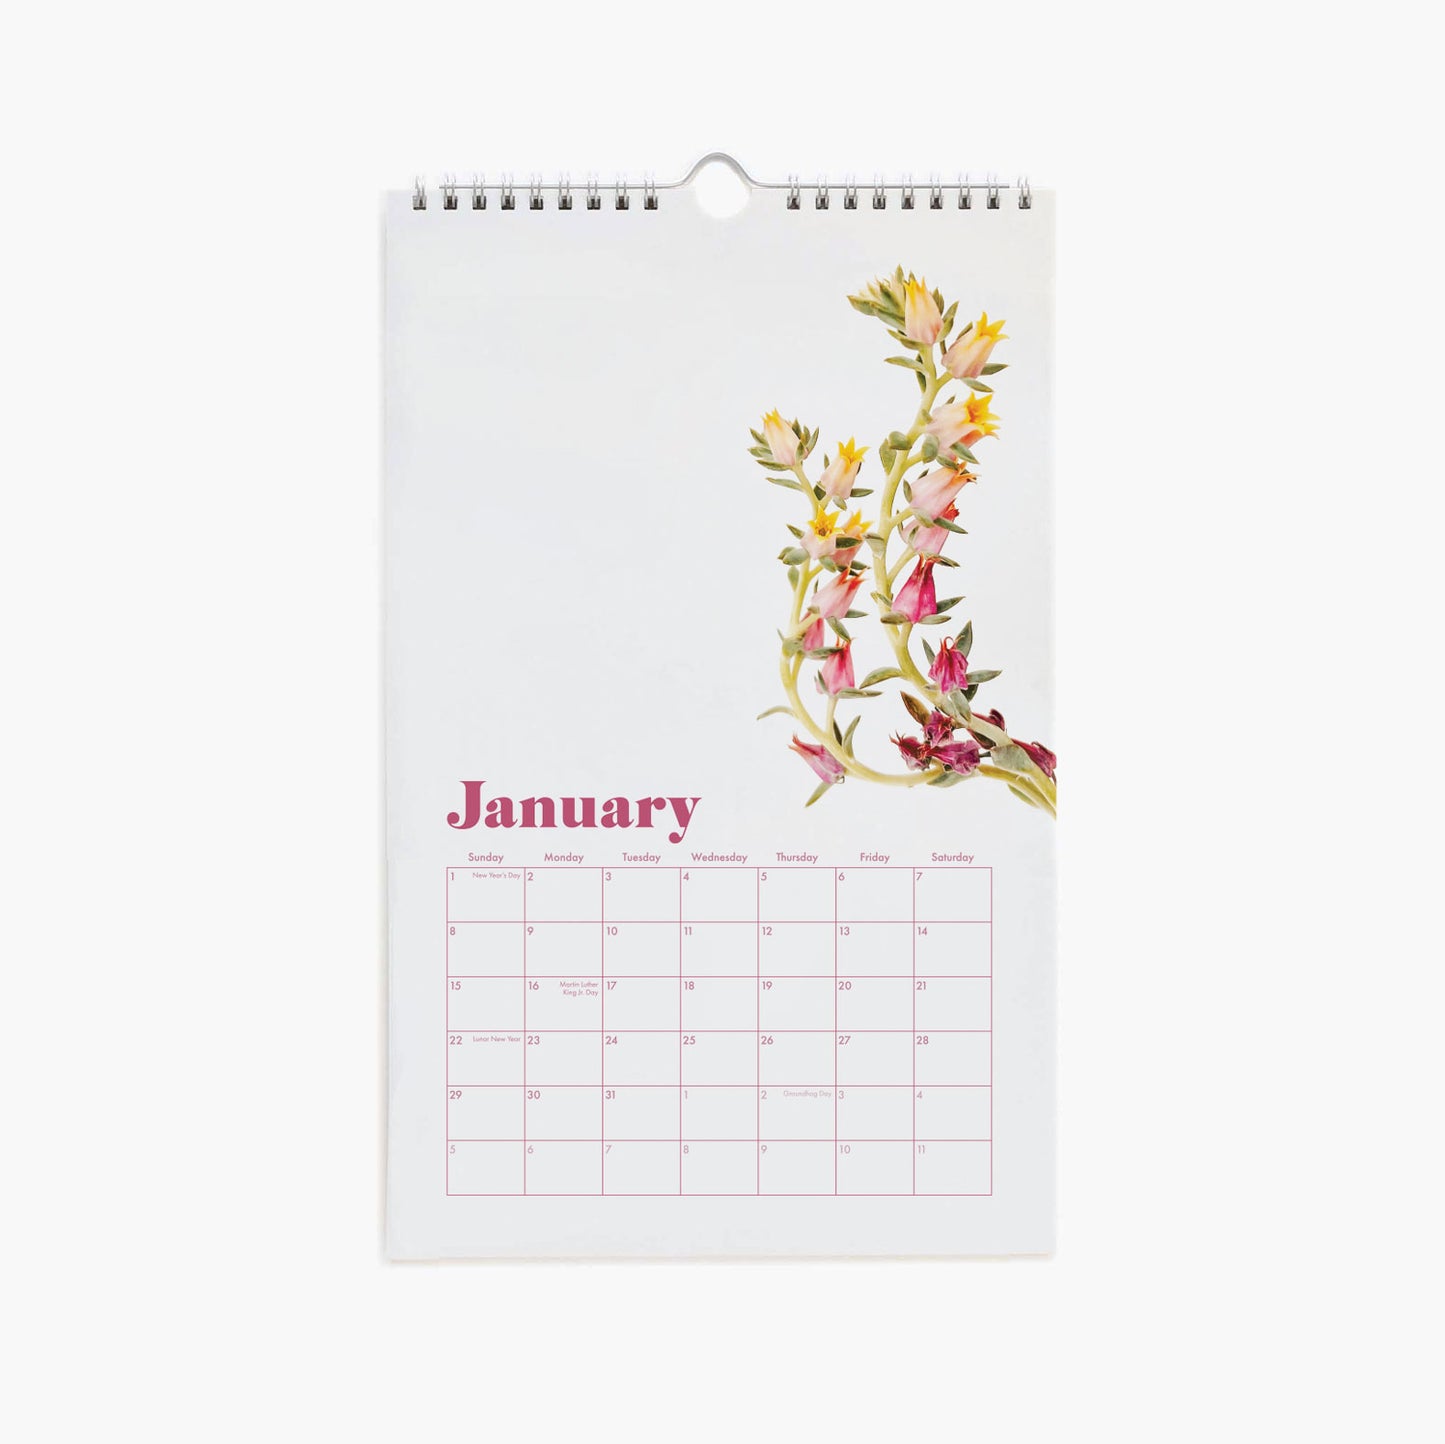 A spiral bound calendar with a cream front cover with a succulent and cacti arrangement photograph and "Desert Blooms 2023 Calendar" in burnt orange text on the top. The interior features a monthly calendar layout accompanied by a different succulent or cacti photograph on each month's page.